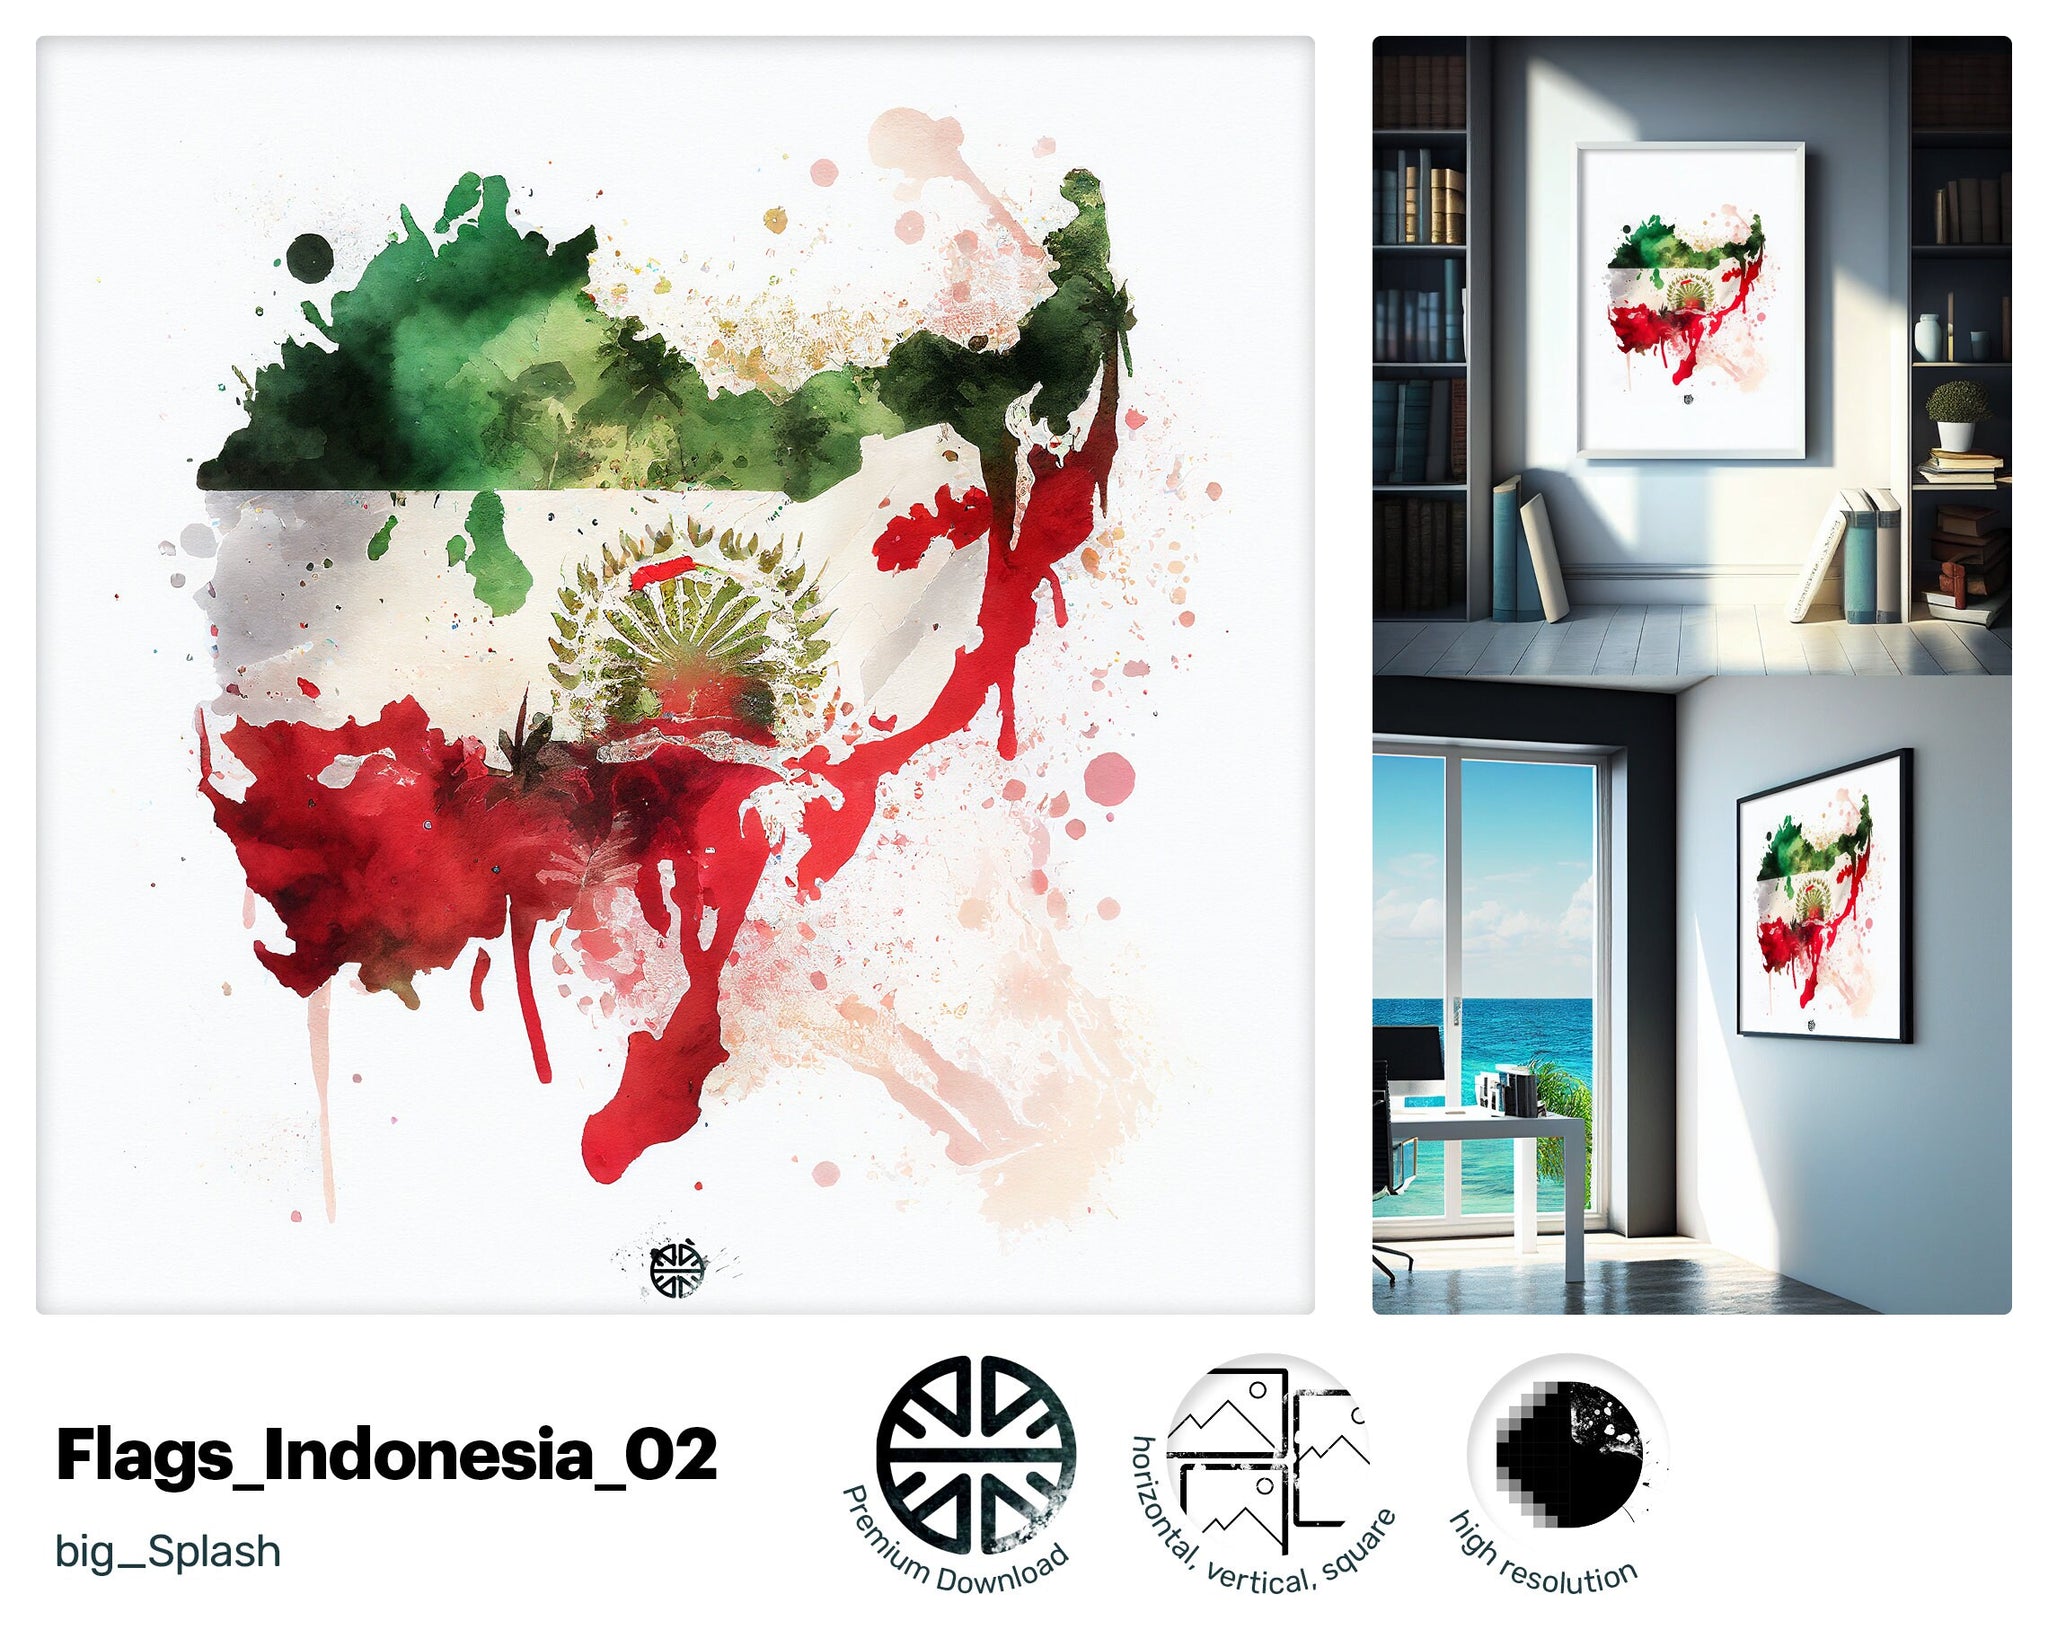 Swift Sparkling Indonesian flag, Yummy Exquisite JPG, Vibrant Luminous Outstanding Uplifting Young Design